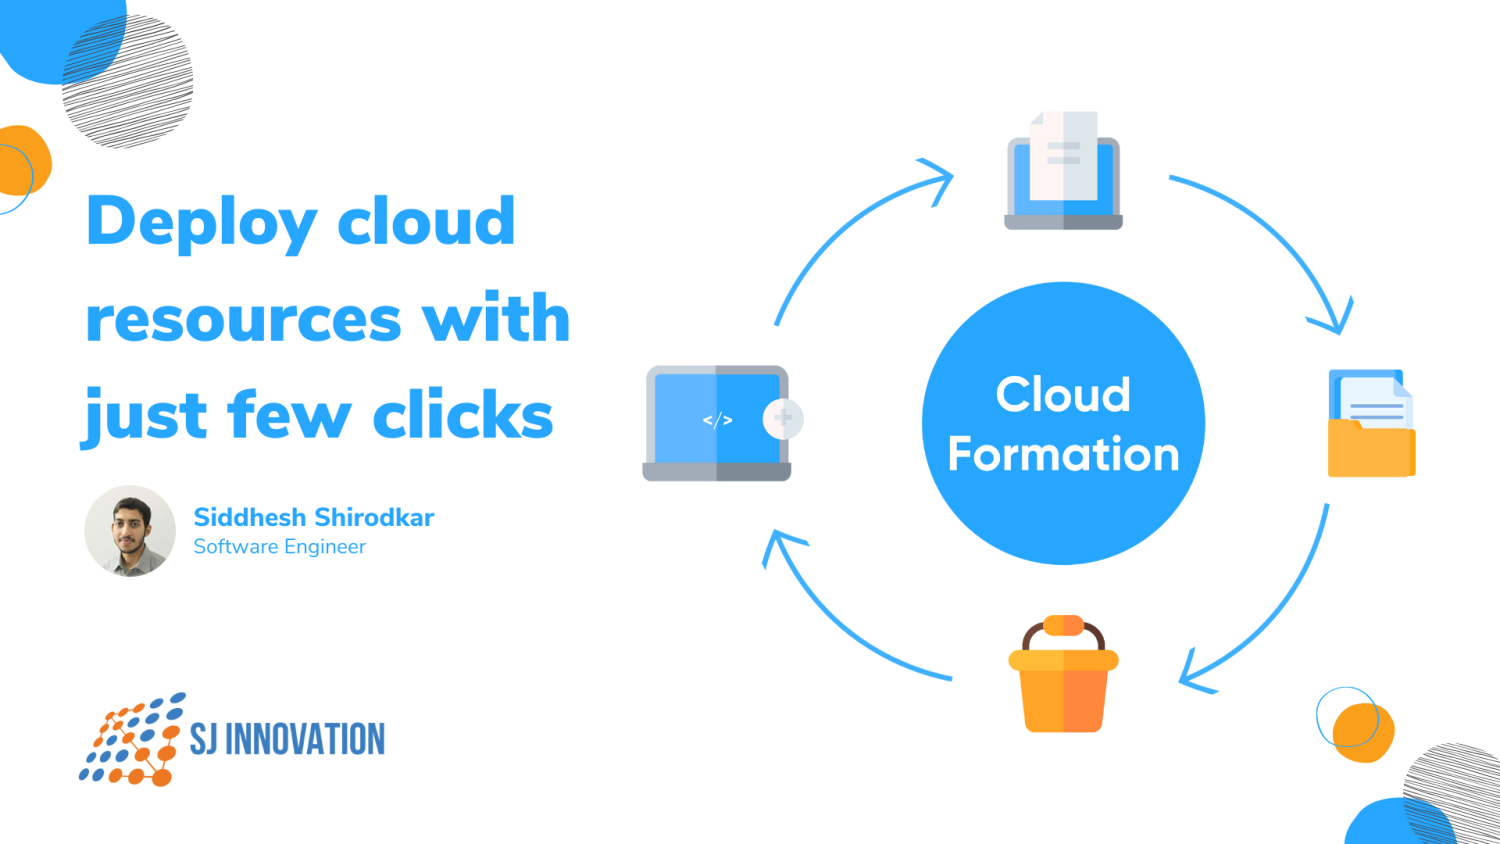 Cloudformation - Deploy cloud resources with just few clicks